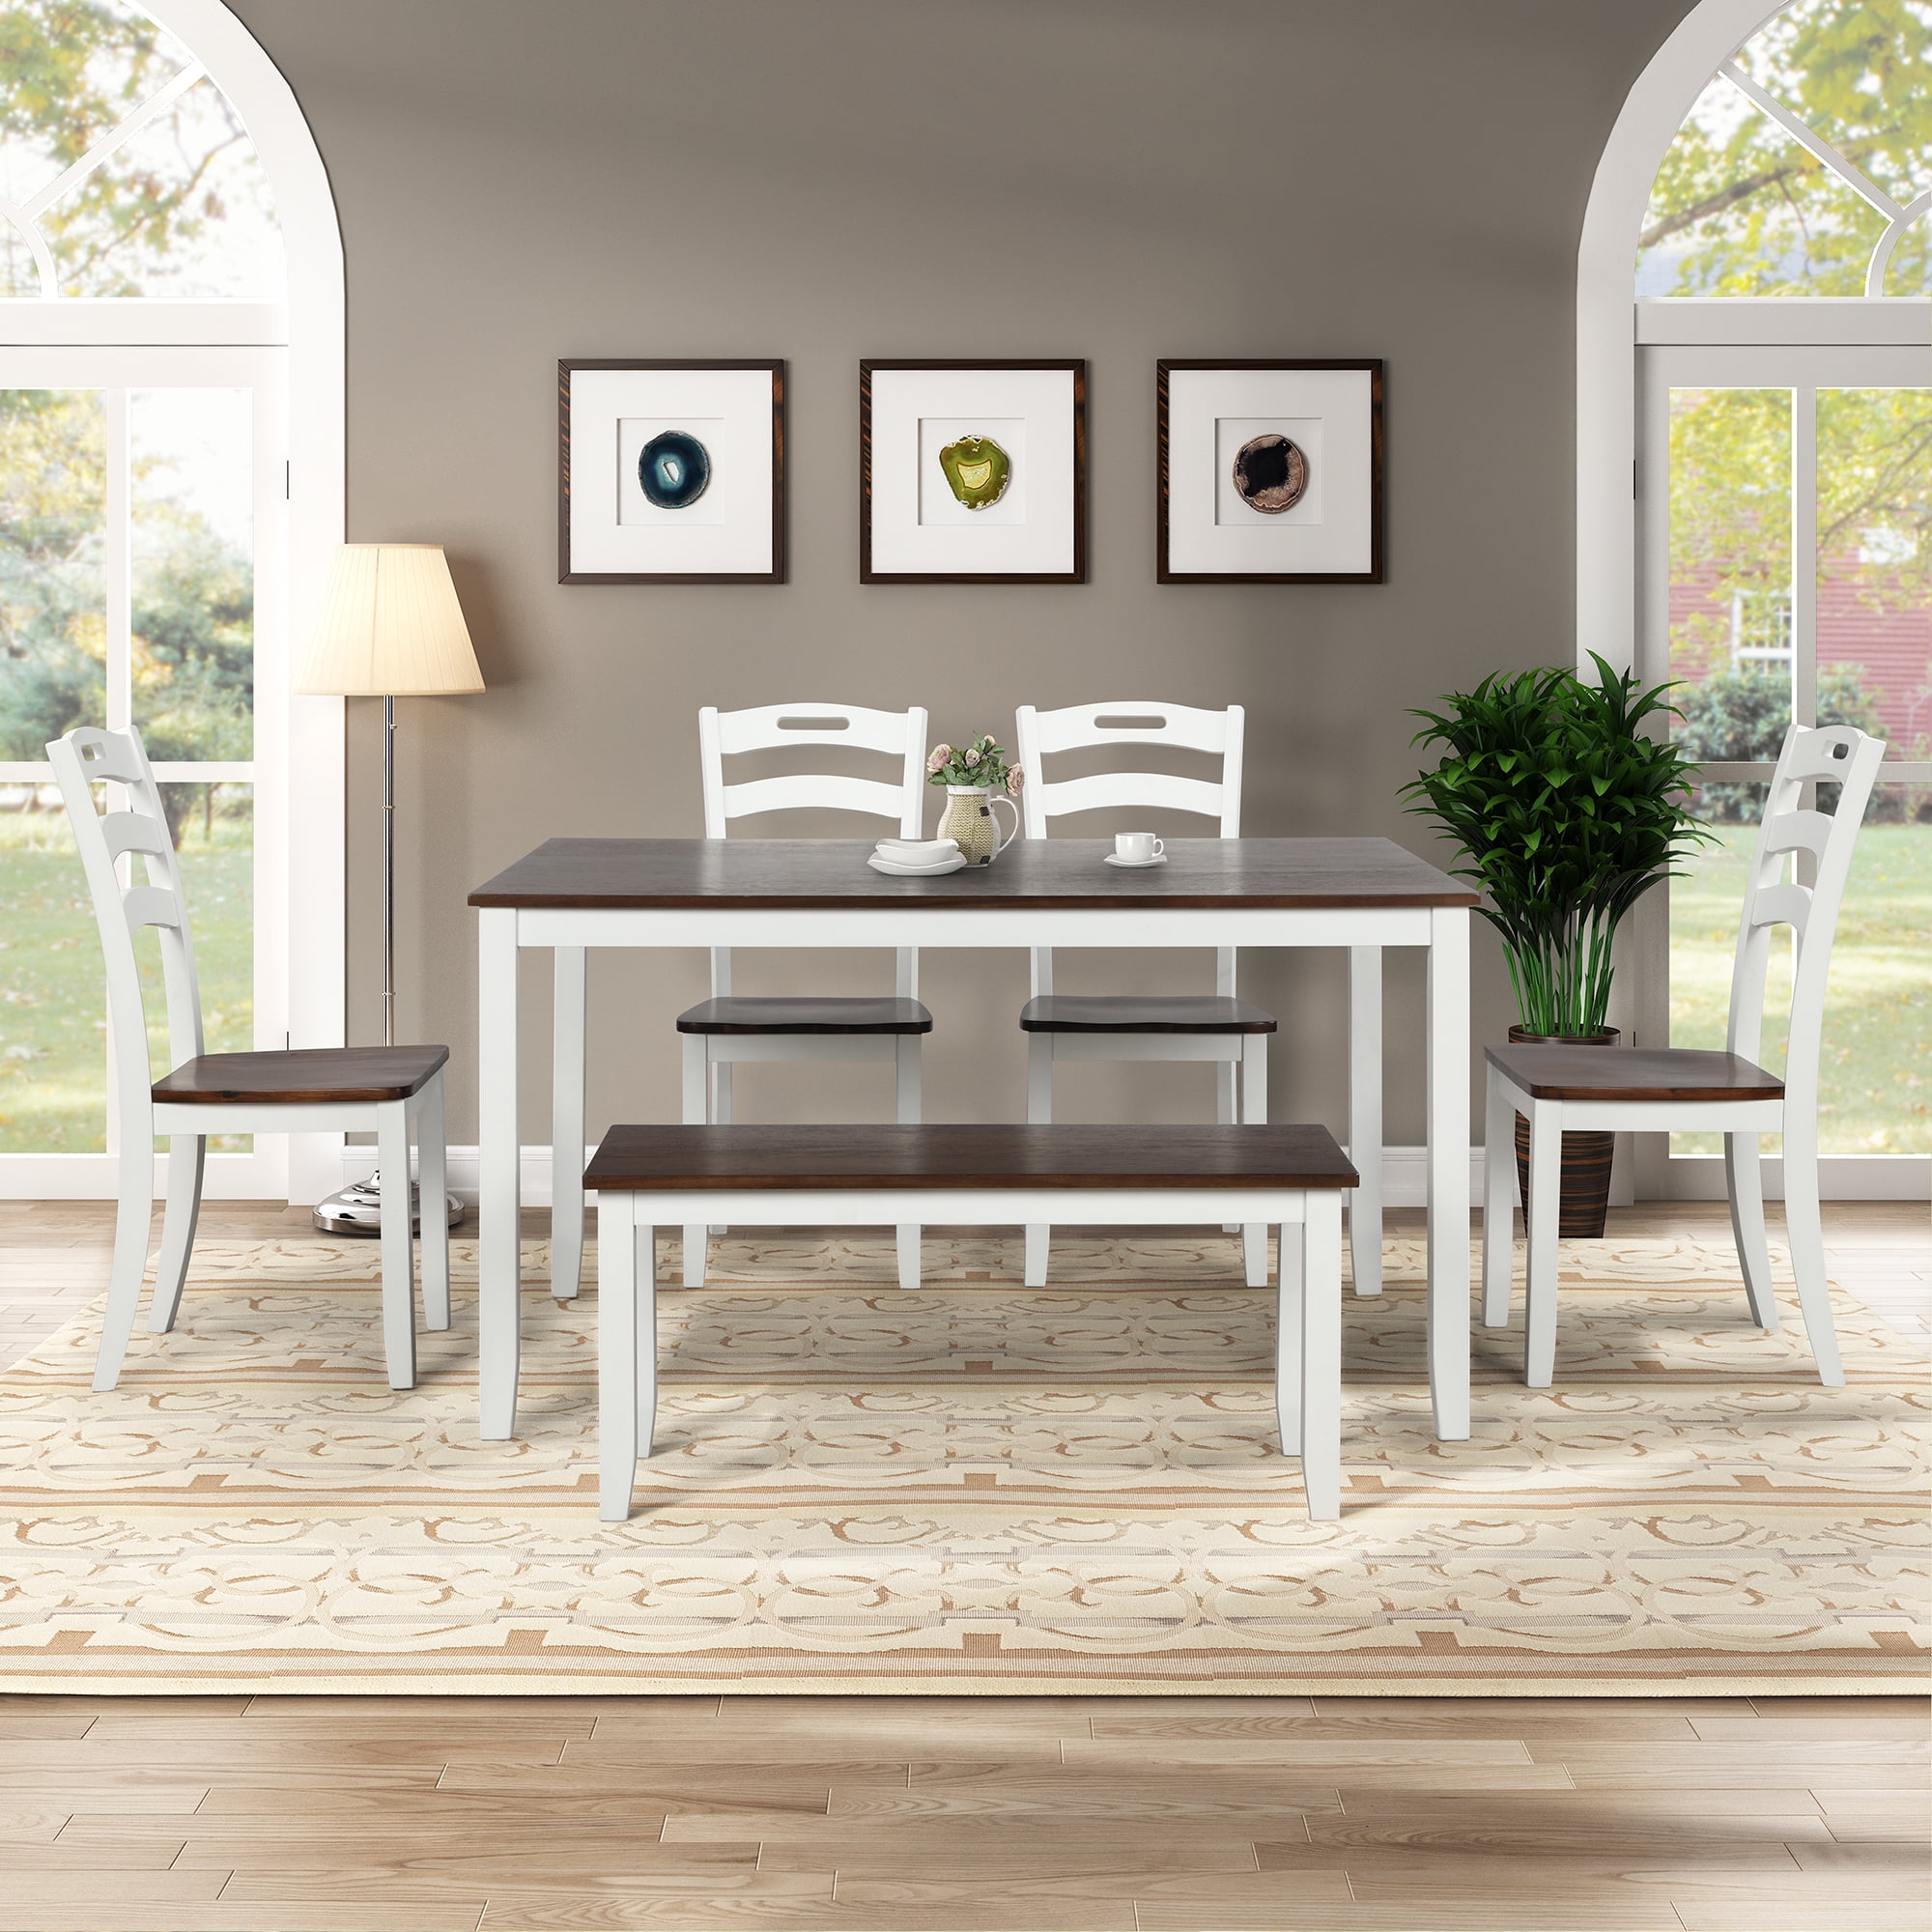 Dining Room Table Set with Bench, URHOMEPRO 6 Piece Wood Dining Set